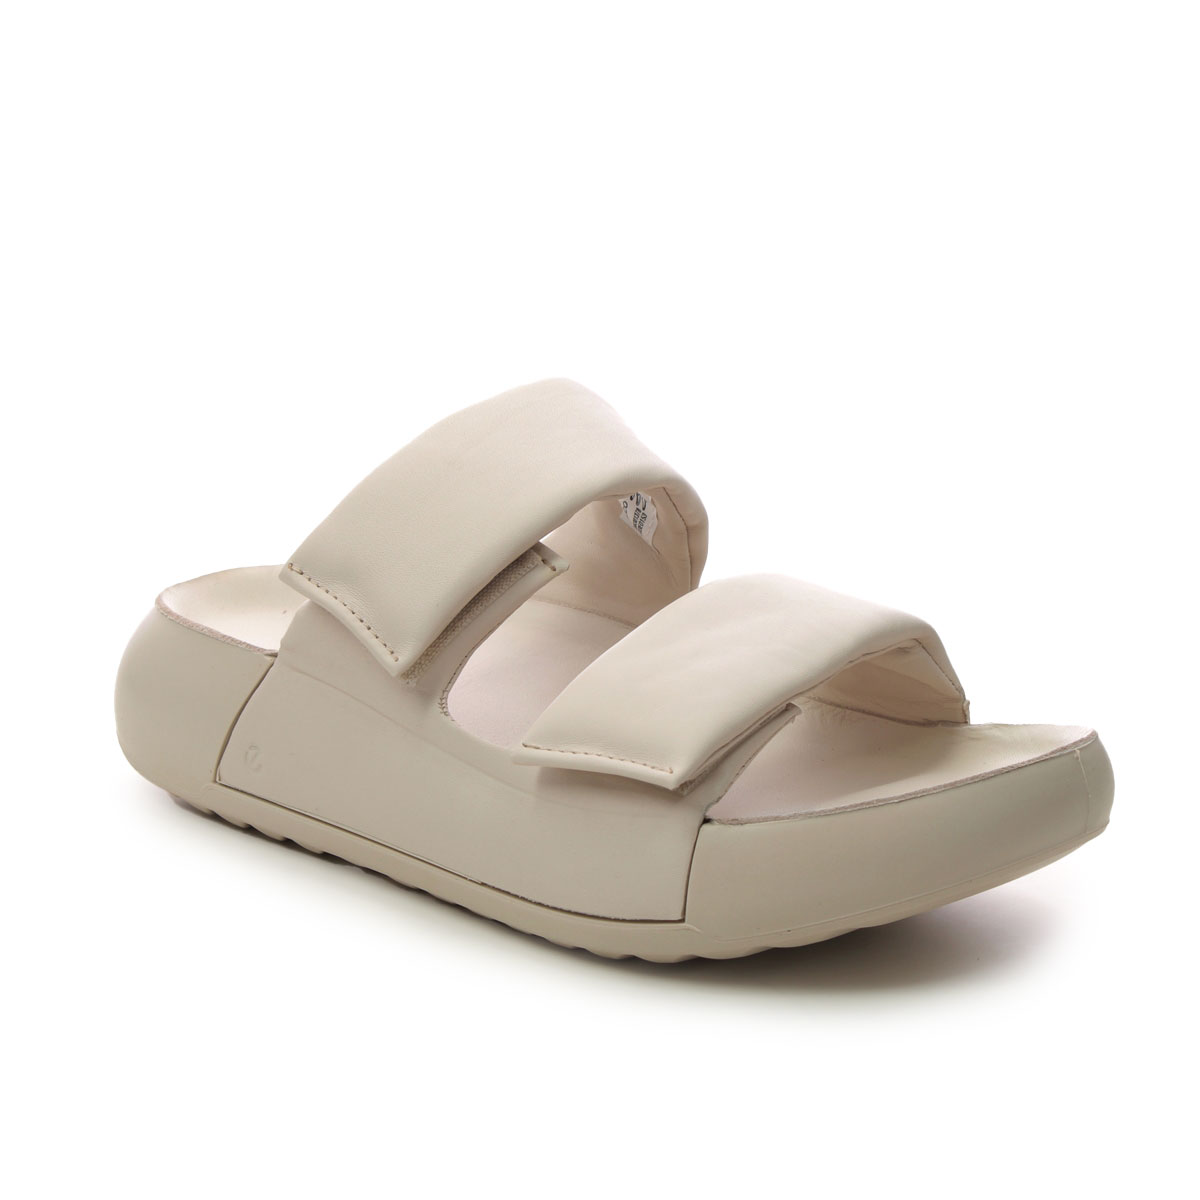 ECCO Cozmo Platform Beige leather Womens Slide Sandals 206663-01378 in a Plain Leather in Size 37